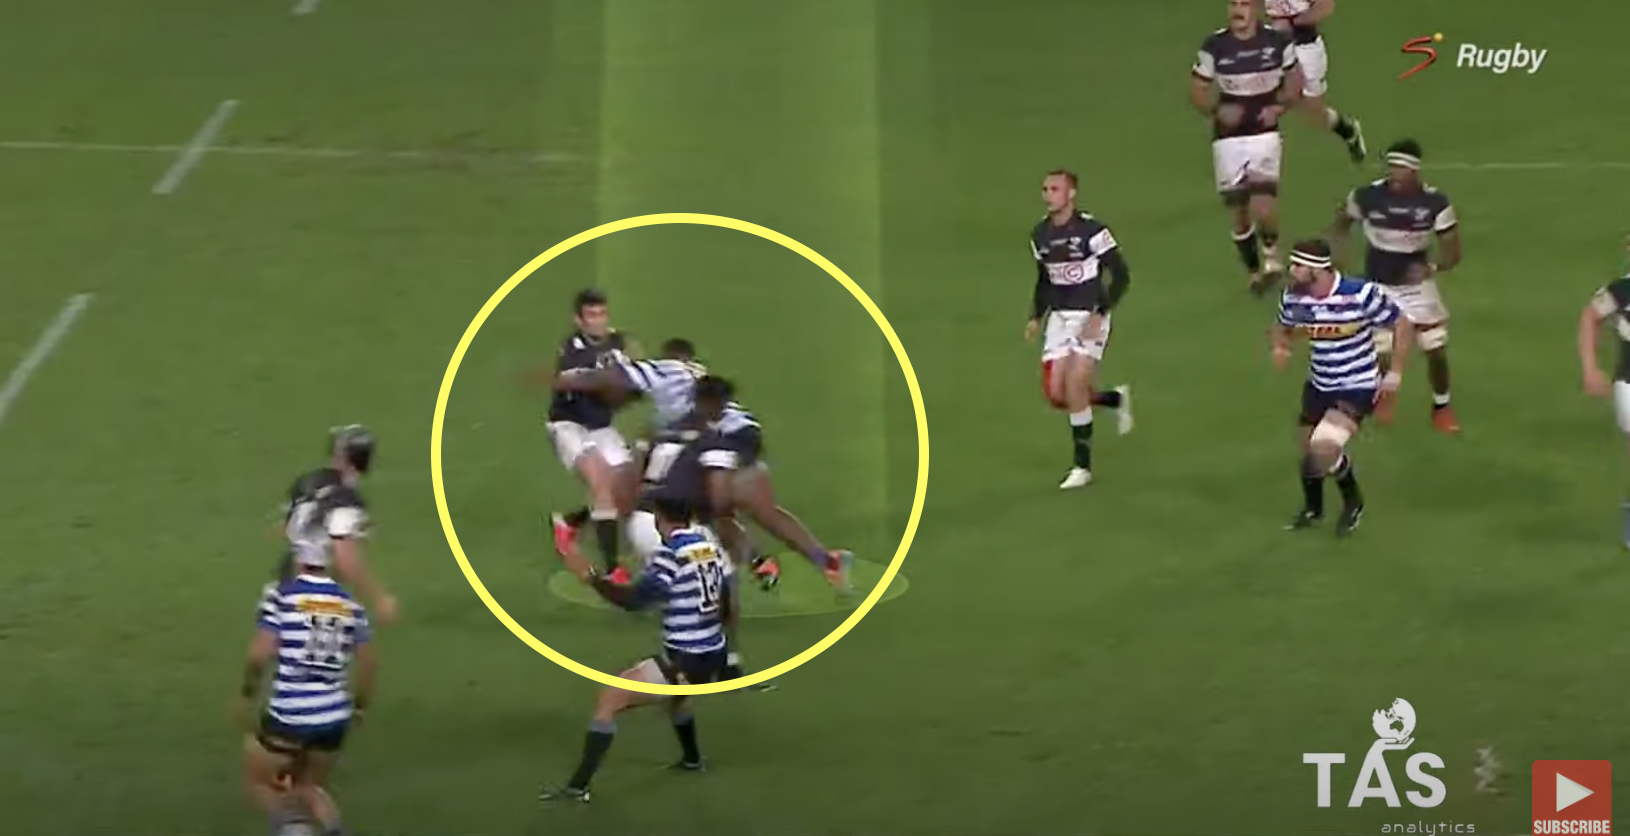 Sharks 10 turns into human tackle bag for prop to flatten